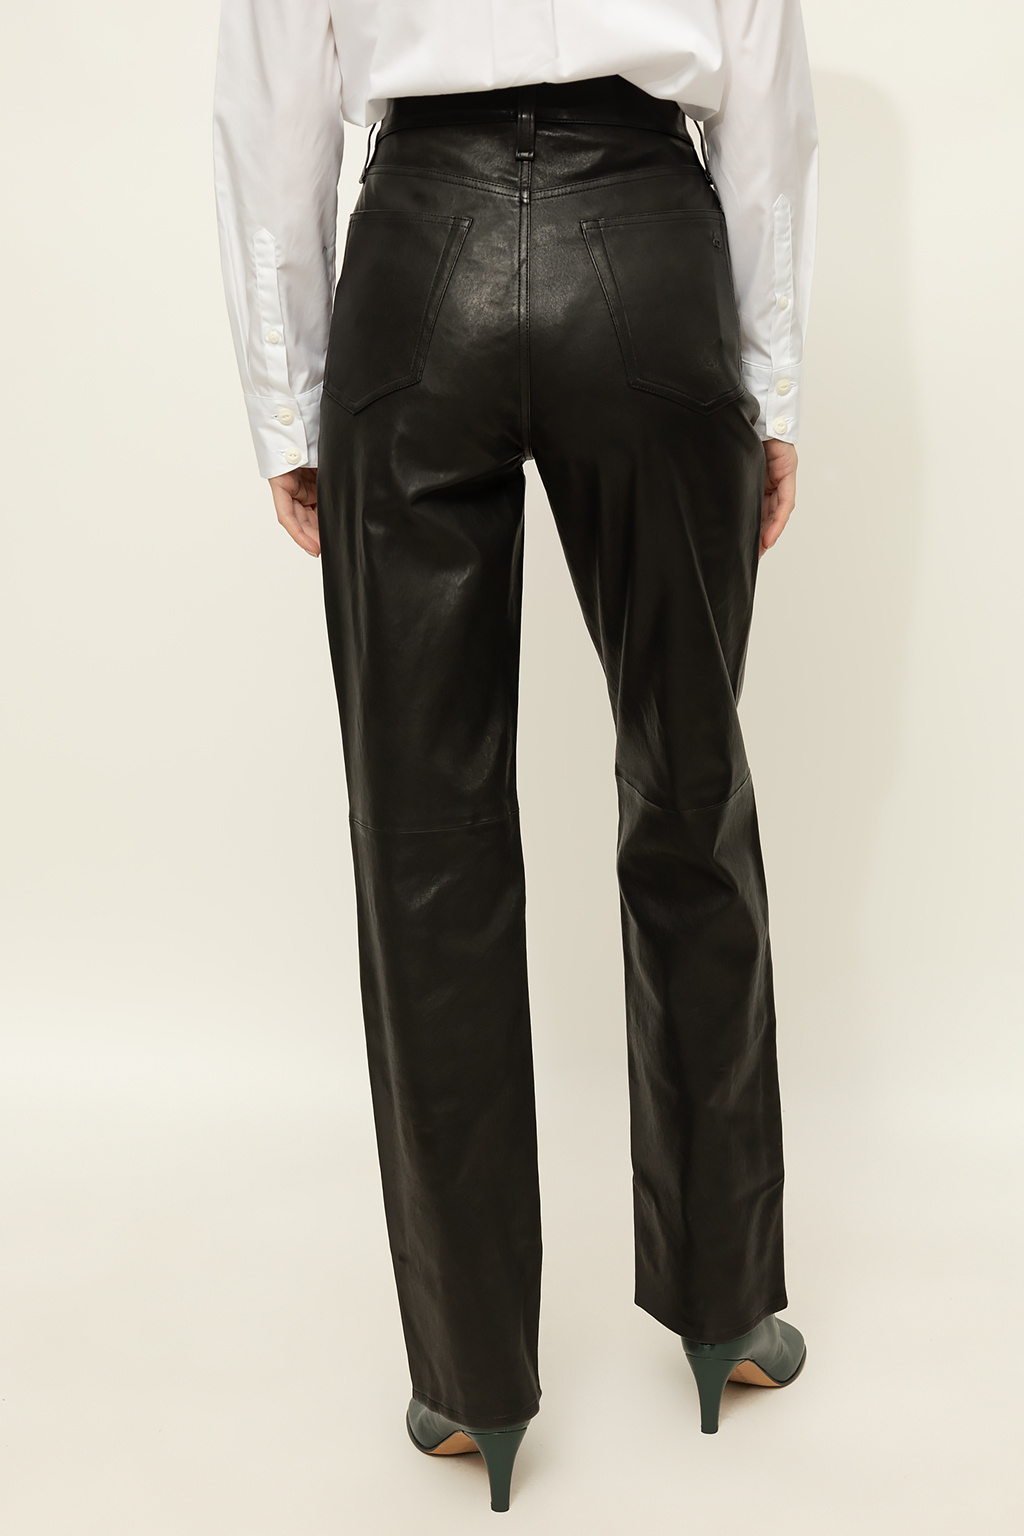 snakeskin effect high-waisted biker shorts  ‘Alex’ leather trousers